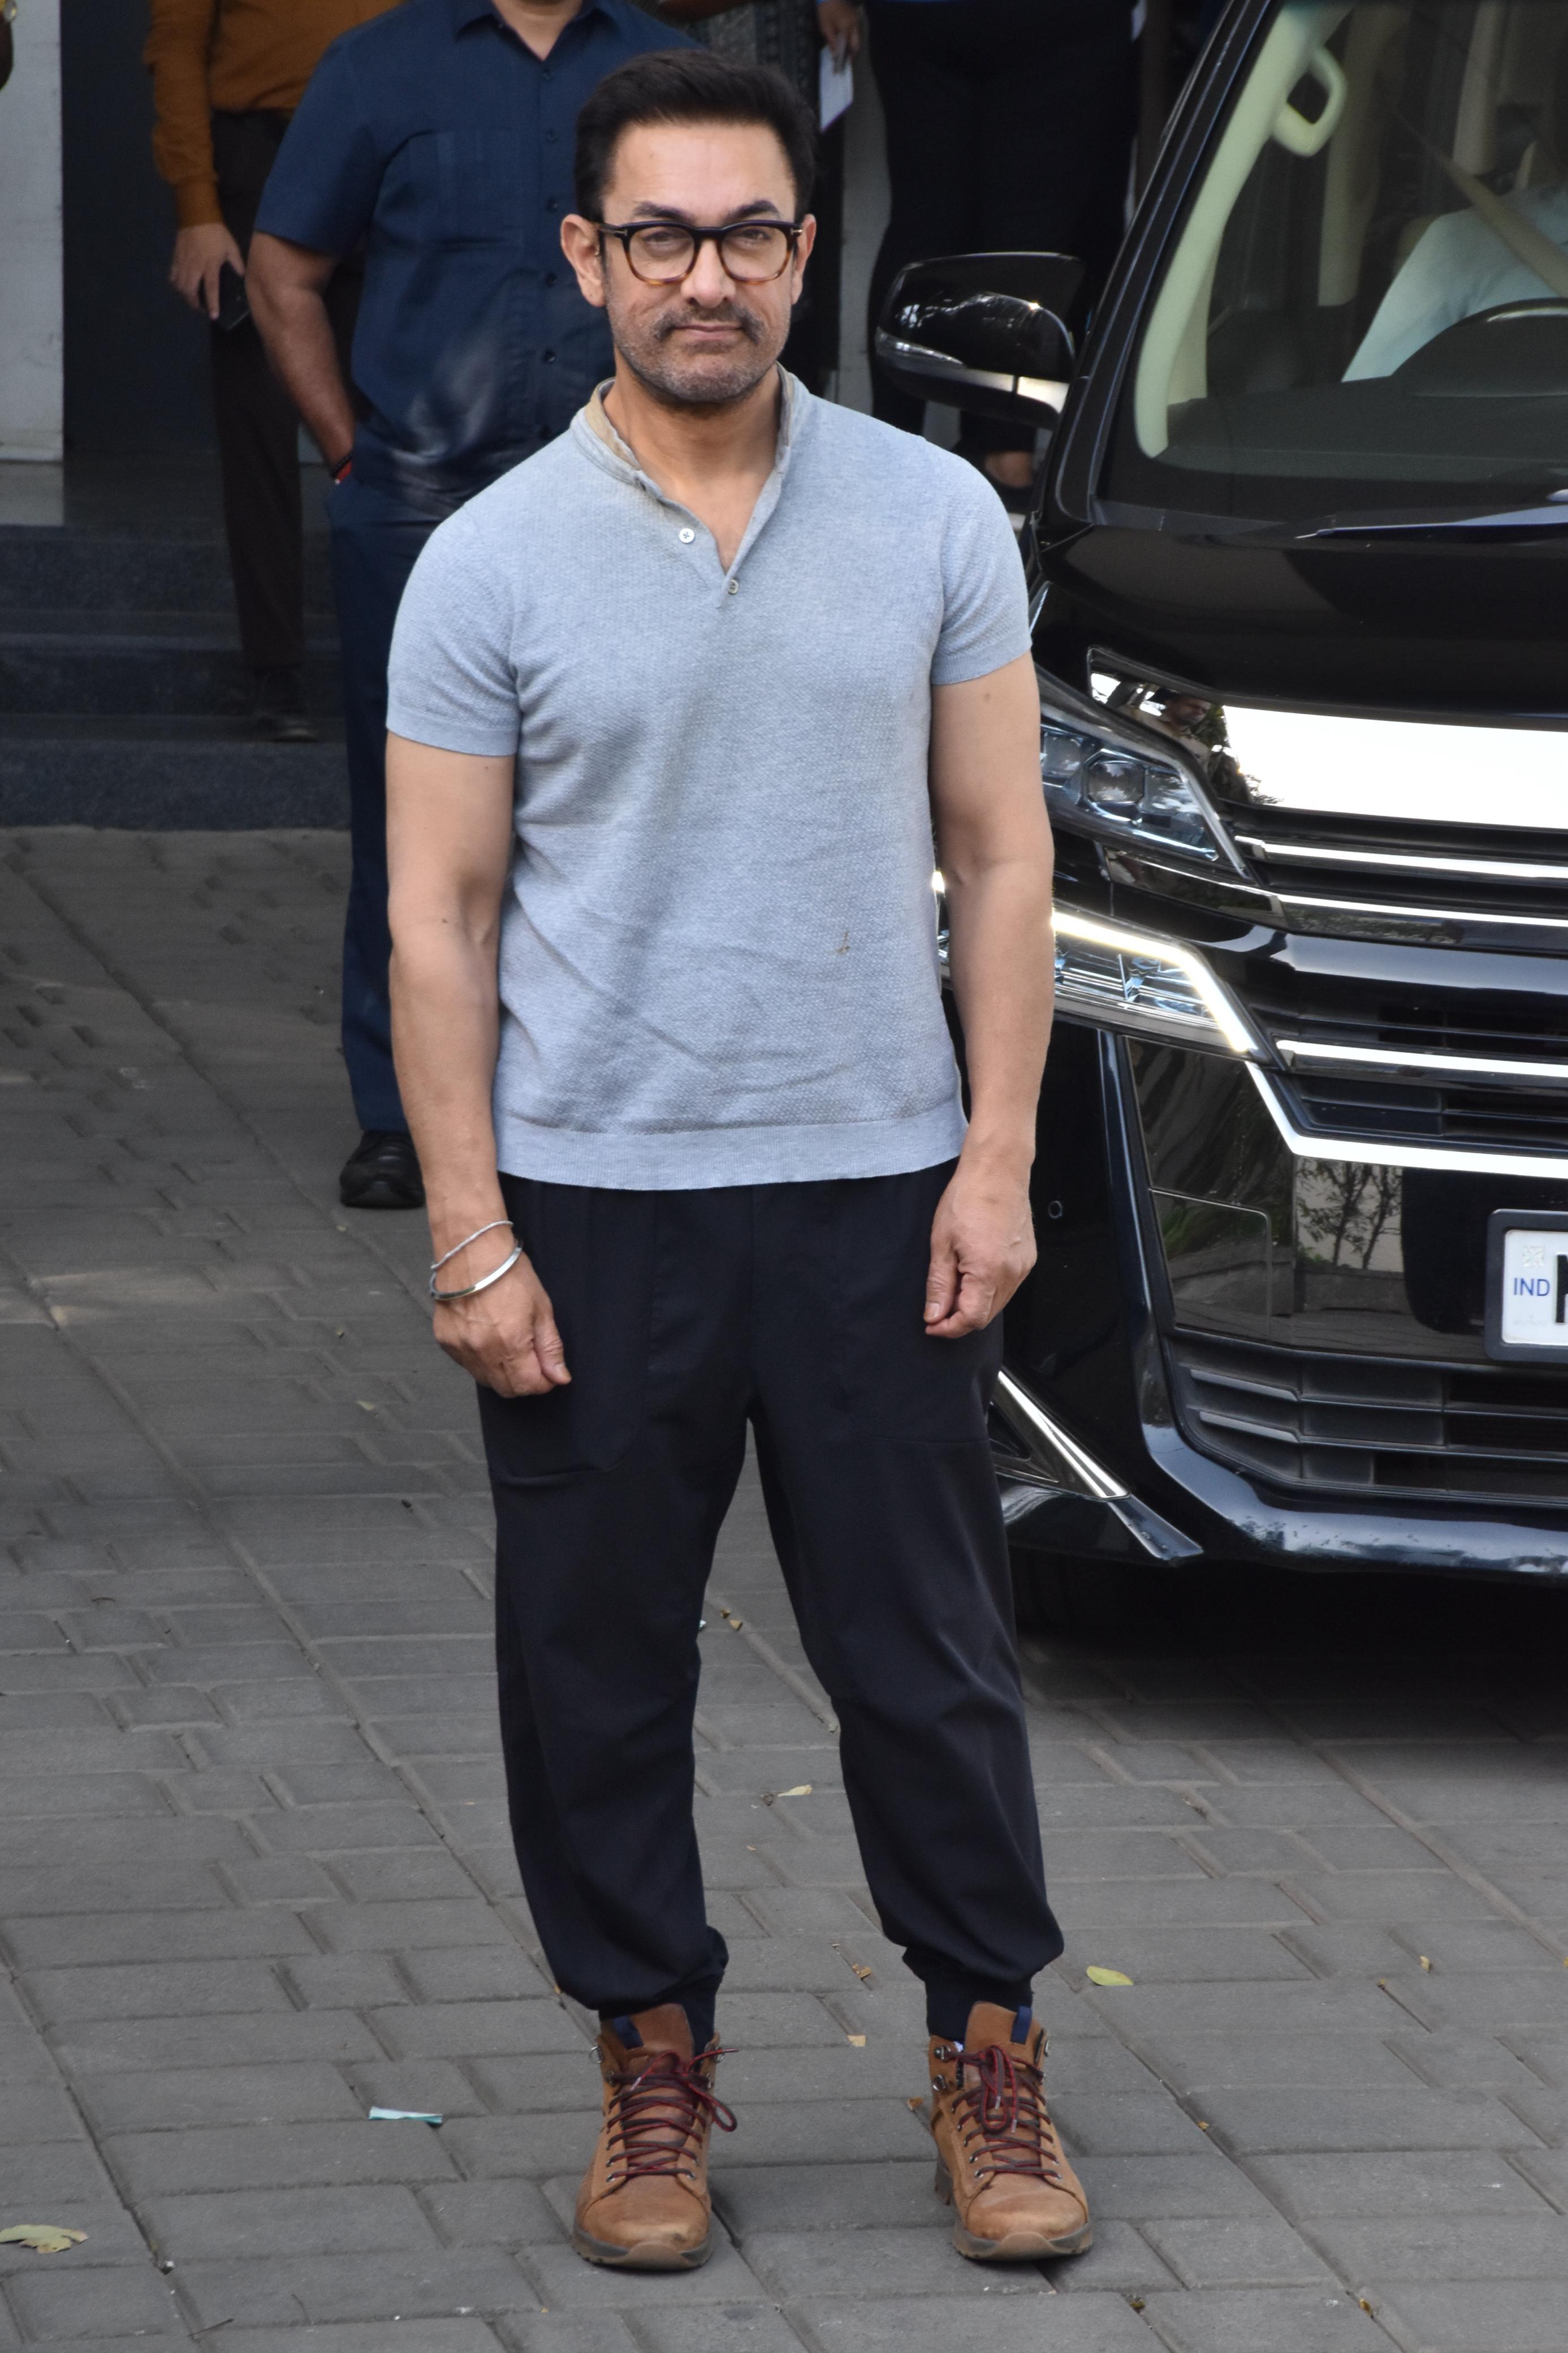 Aamir Khan was seen at the airport situated in Kalina. Mr Perfectionist was dressed in his trademark casual style